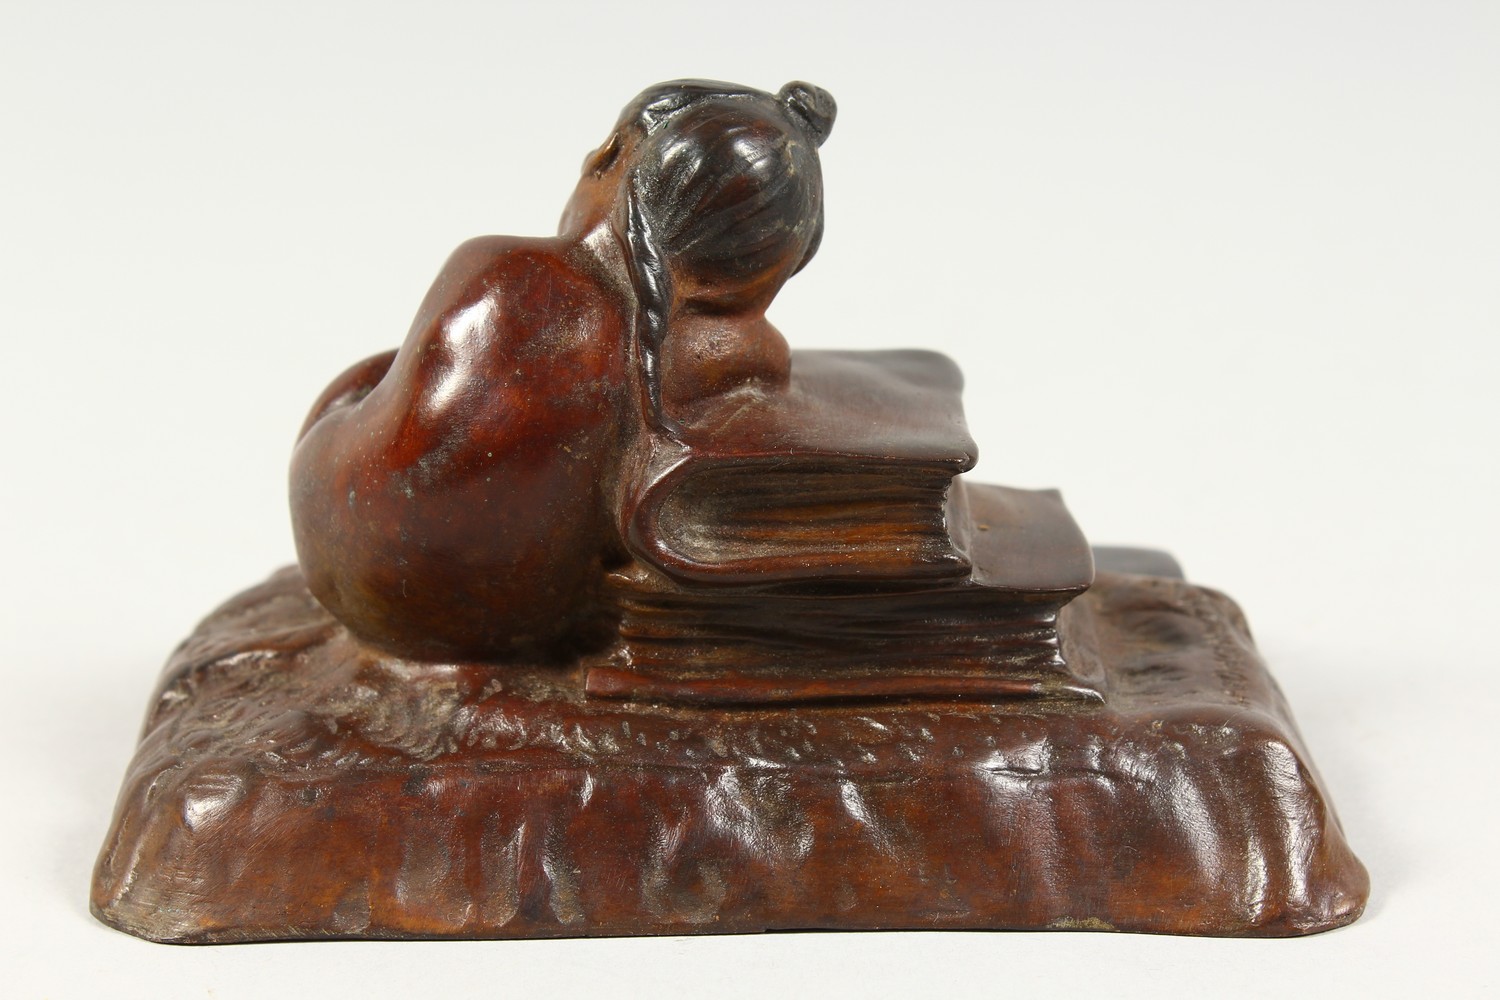 A SMALL CAST BRONZE MODEL OF A YOUNG GIRL ASLEEP AGAINST A PILE OF BOOKS. 5ins wide. - Image 3 of 6